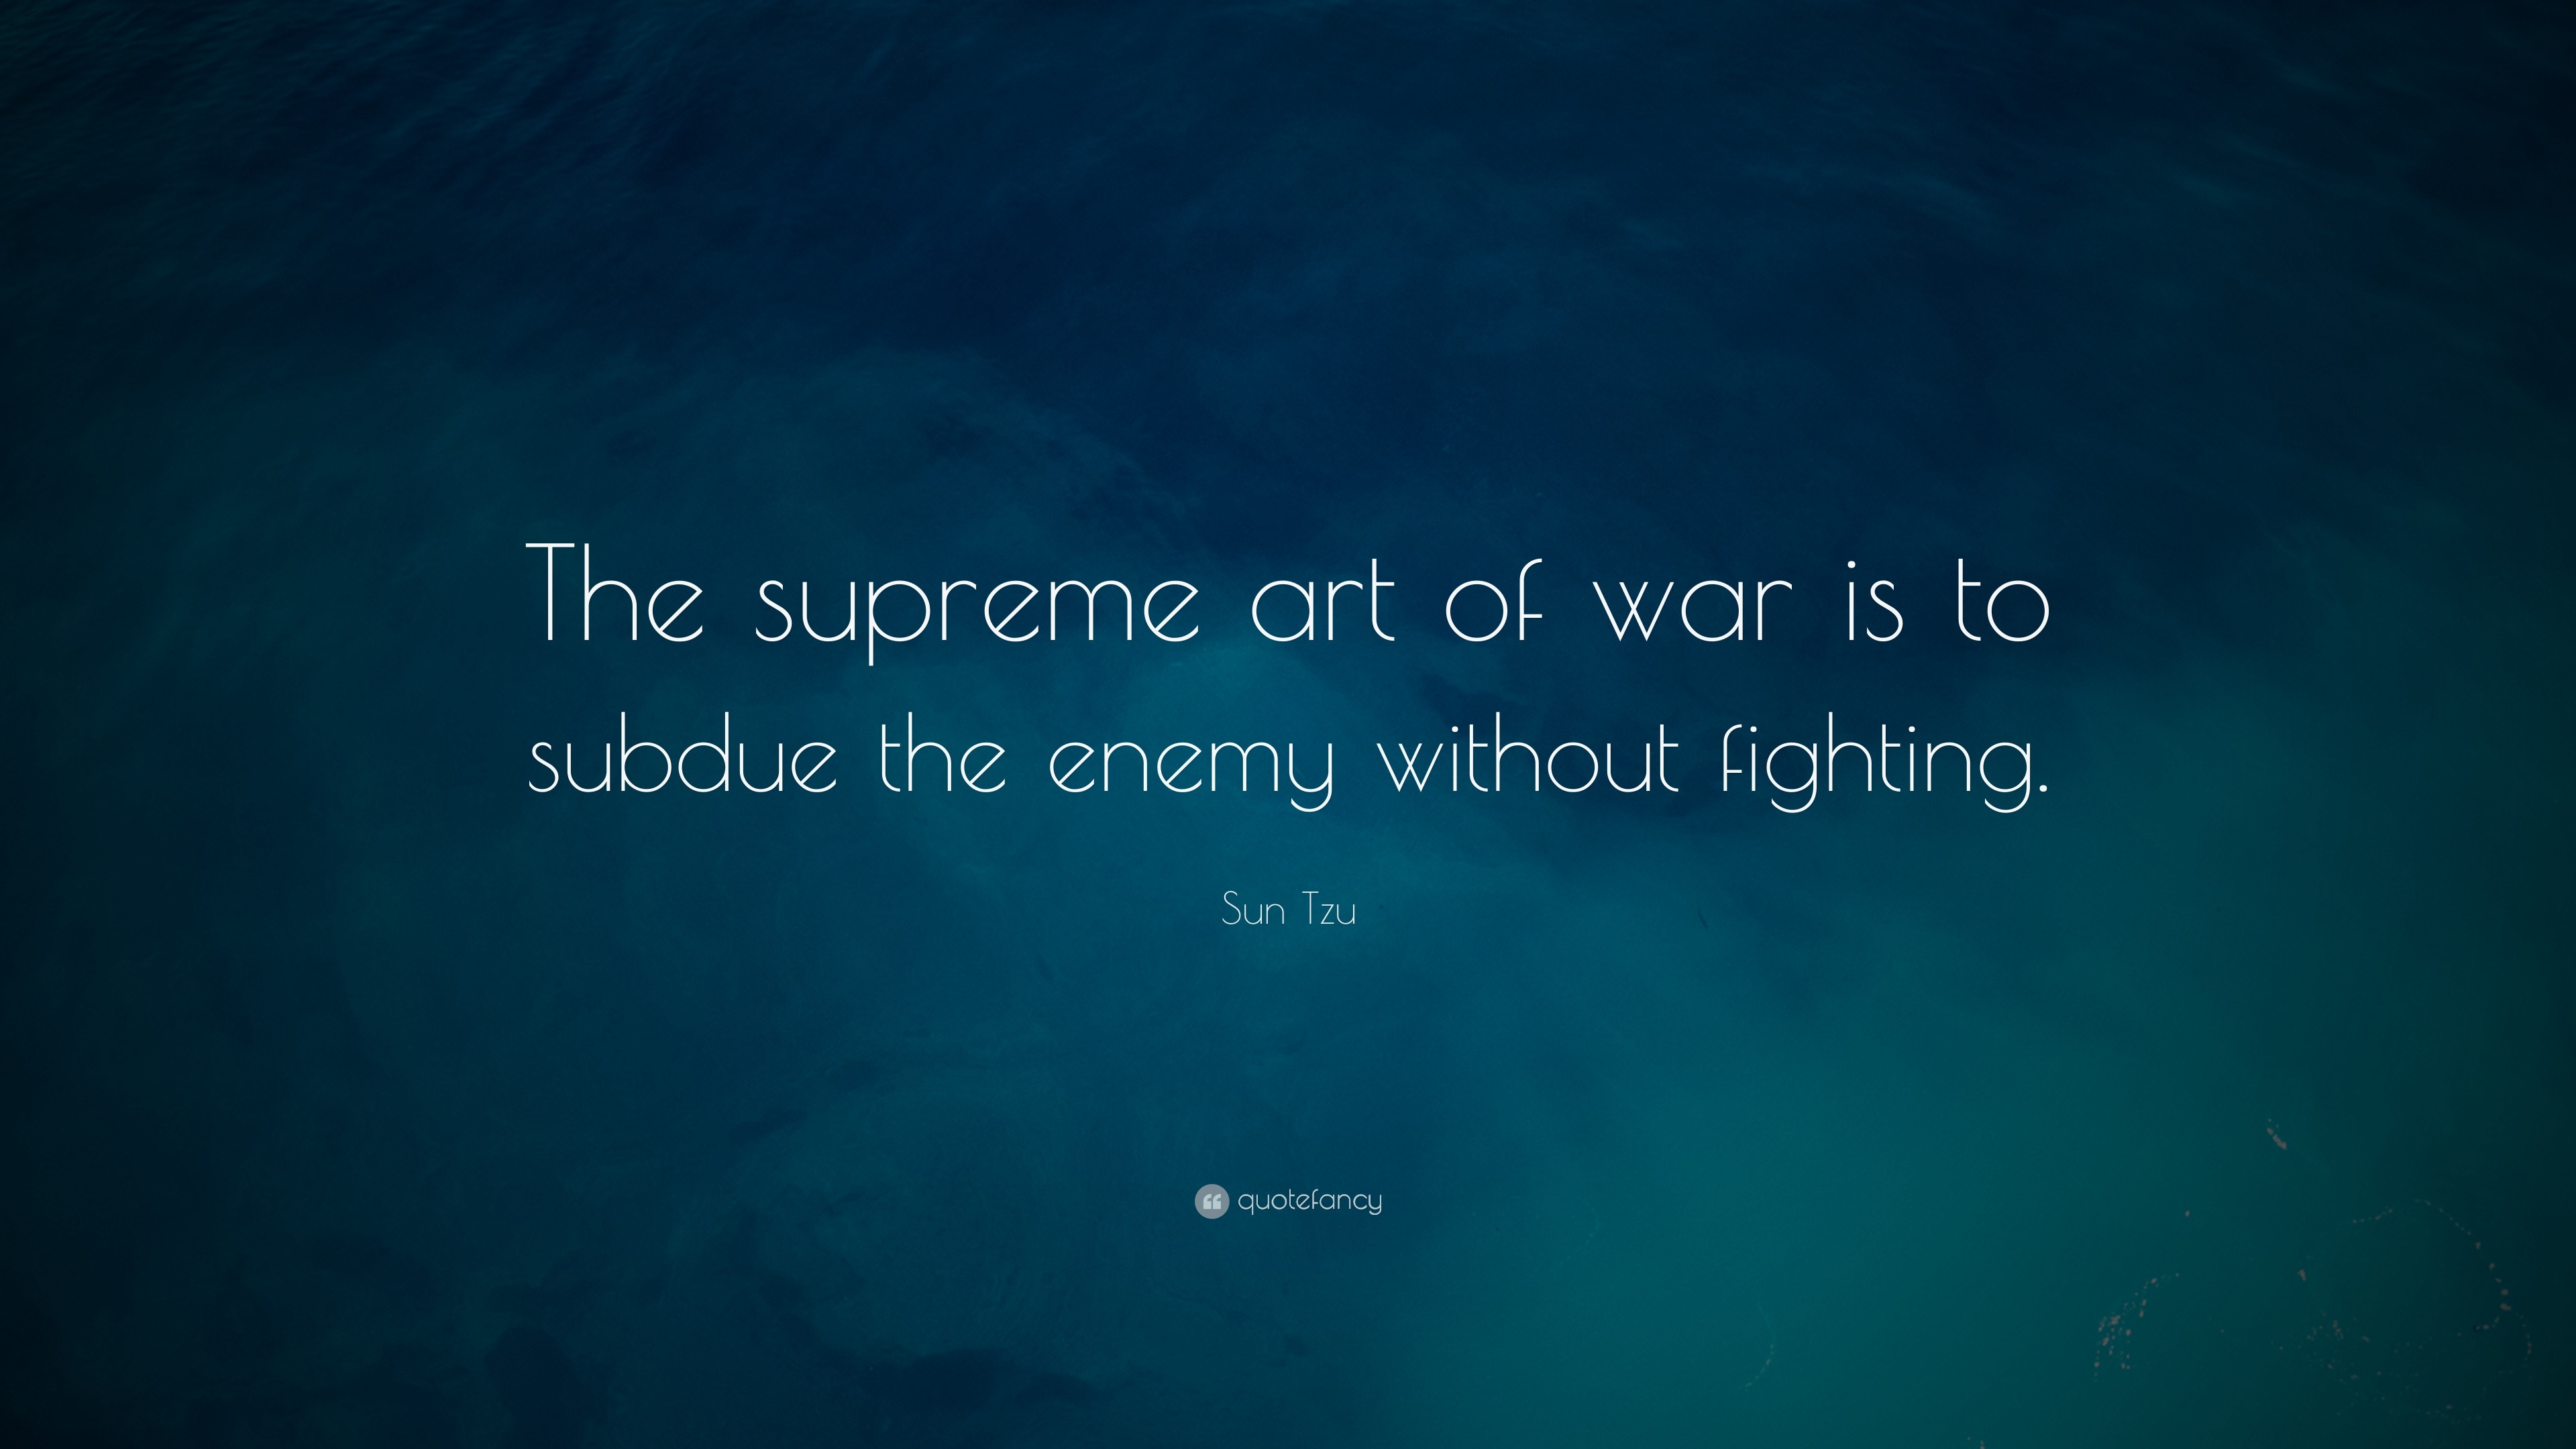 Of war art quotes the The Art